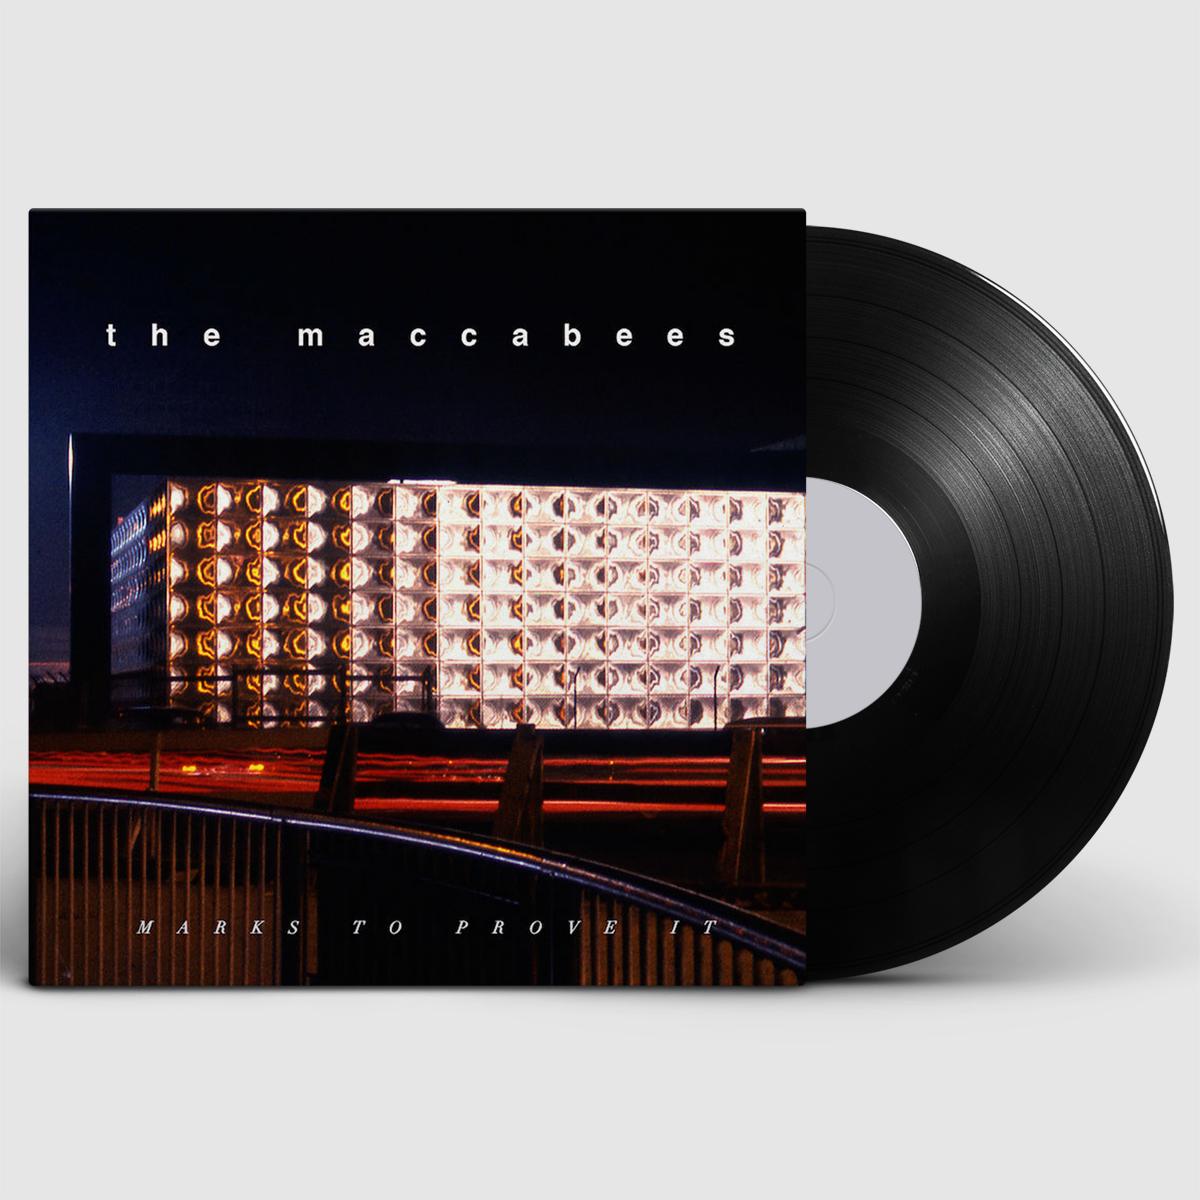 The Maccabees - Marks To Prove It: Vinyl LP